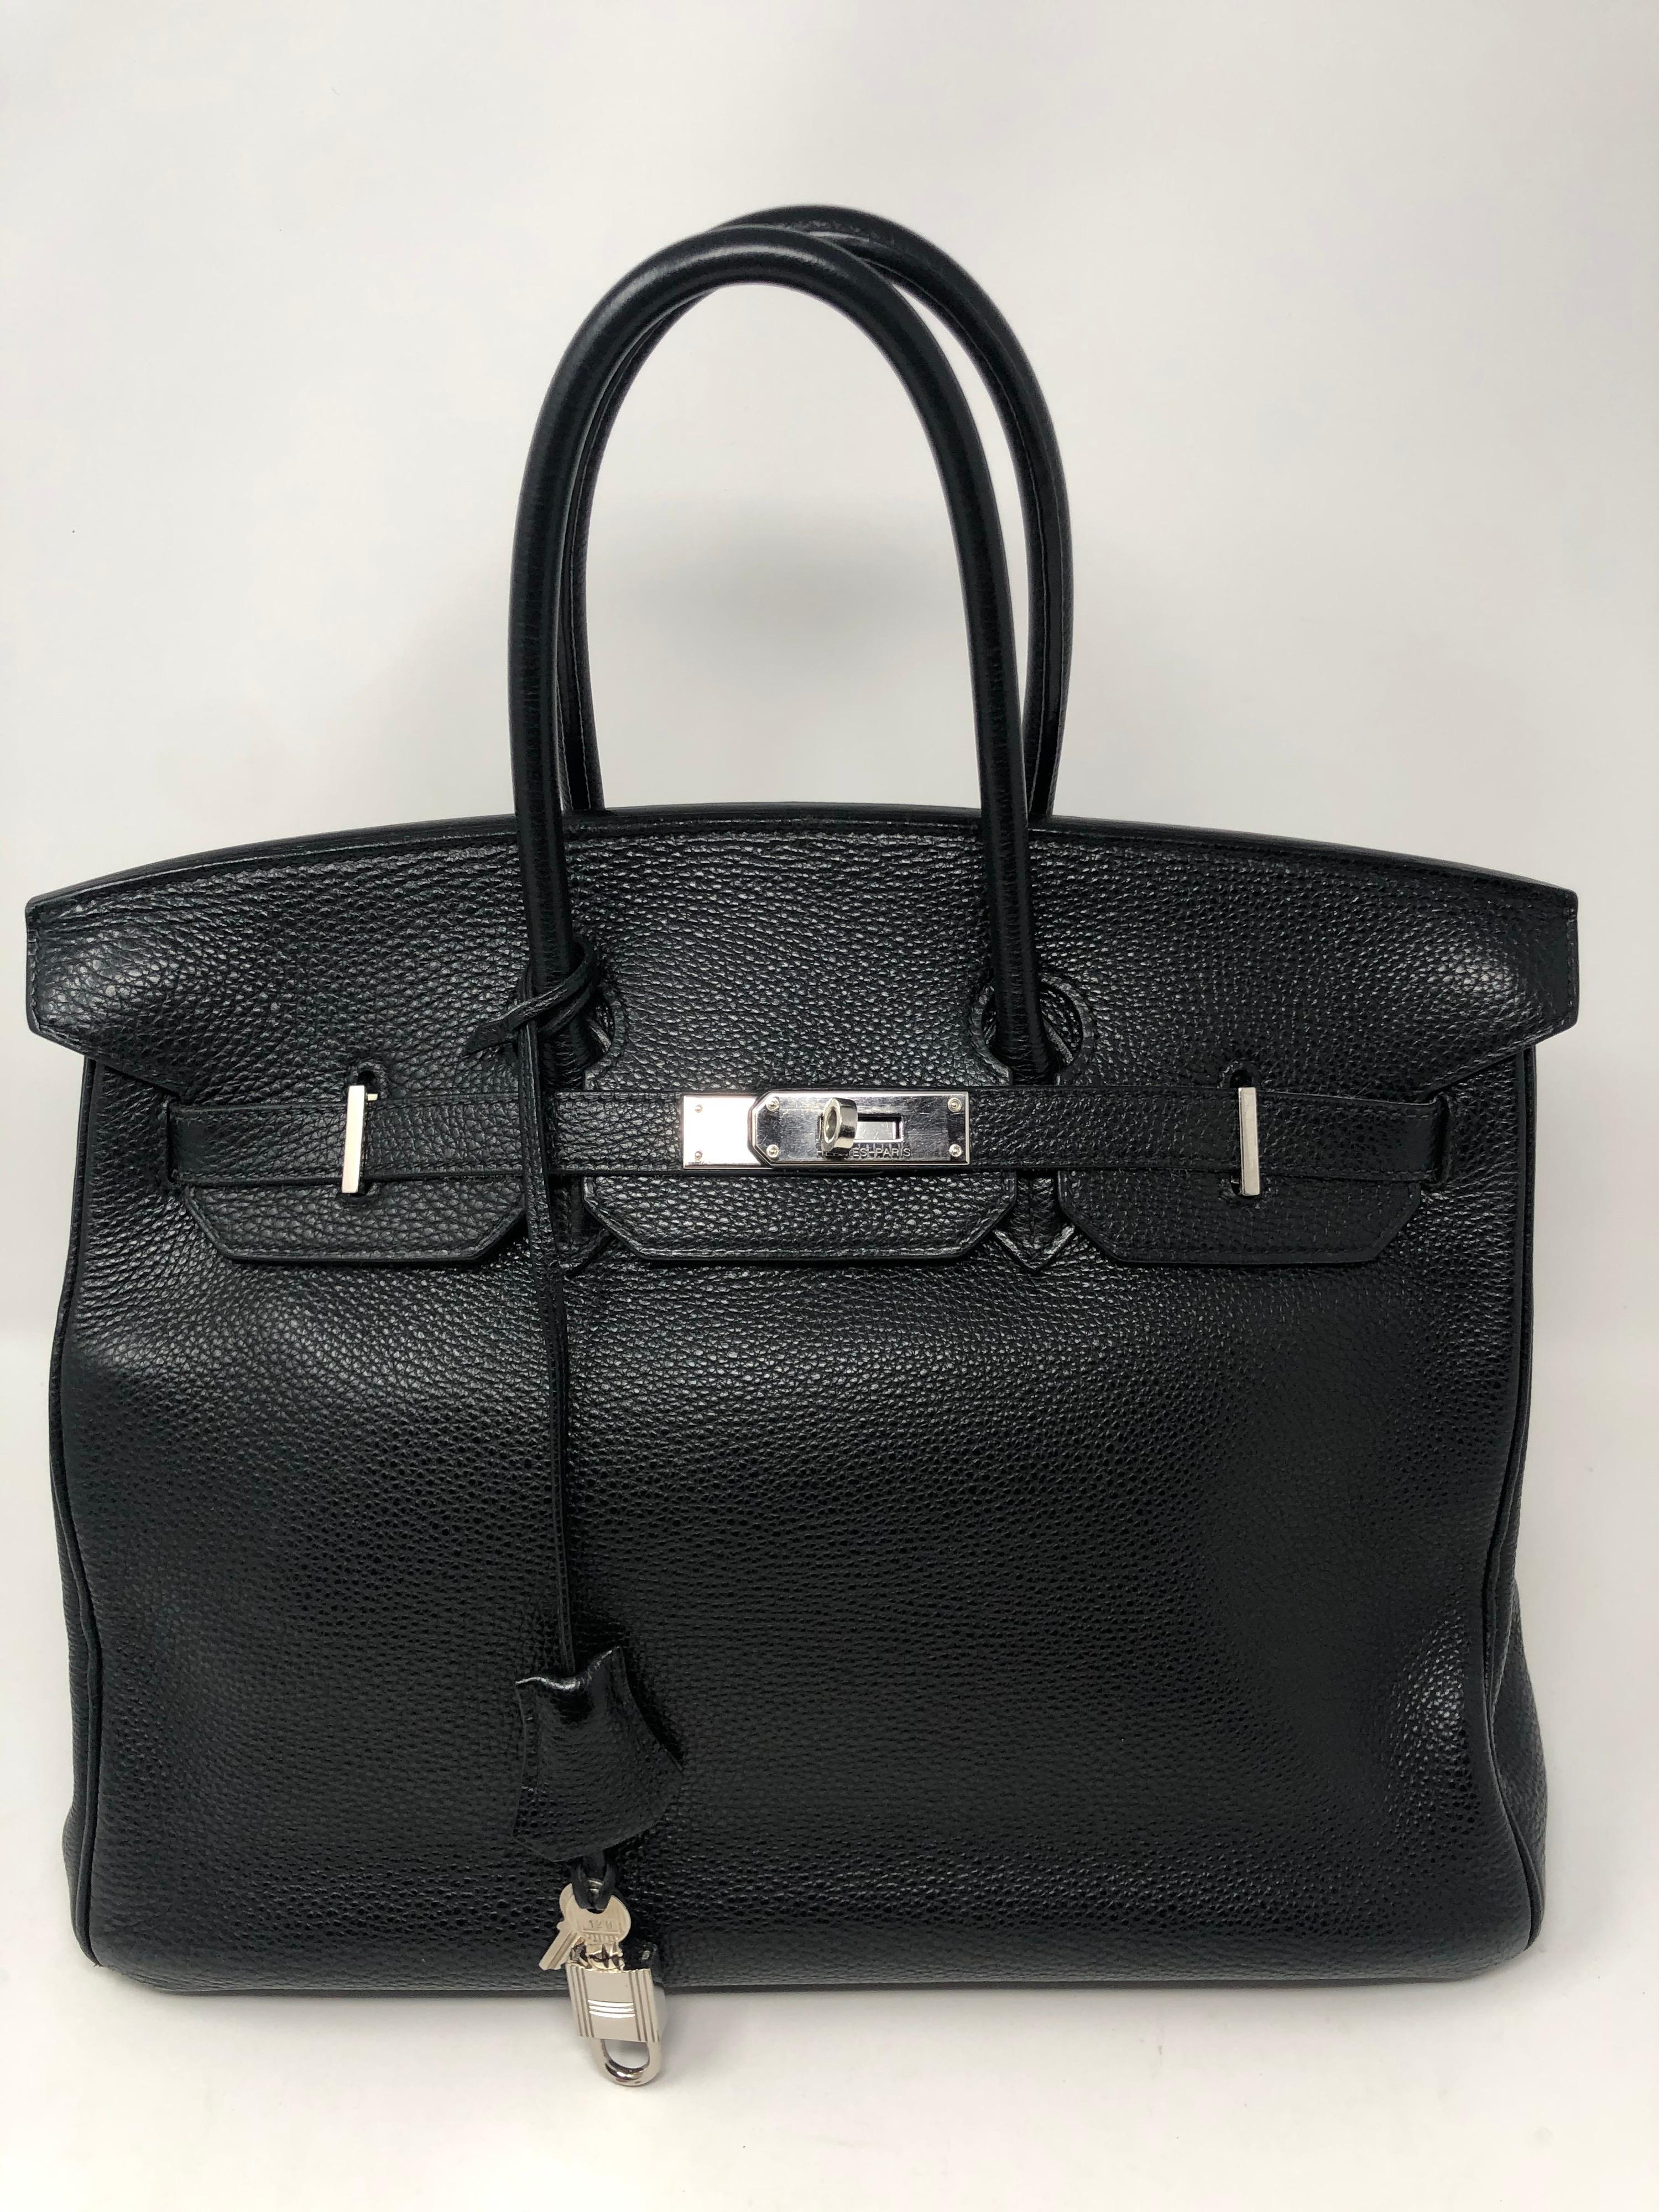 Hermes Birkin 35 Black with Palladium Hardware. Togo leather from 2006. Classic black color. 13.4